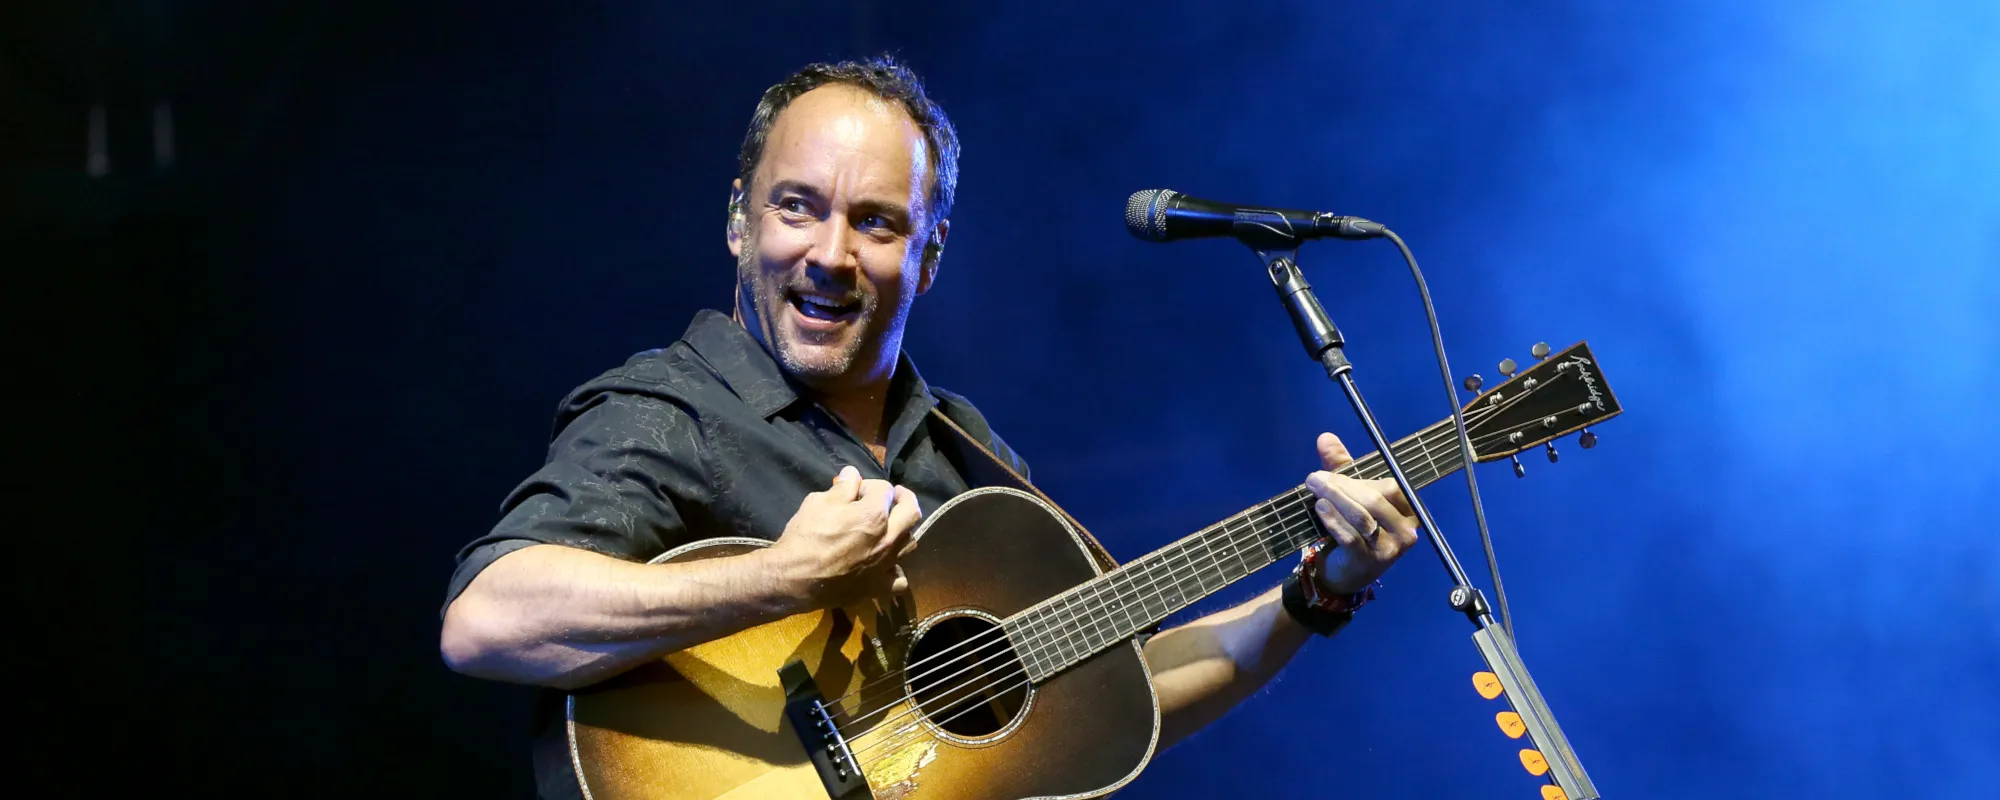 Dave Matthews Band to Perform in South Africa